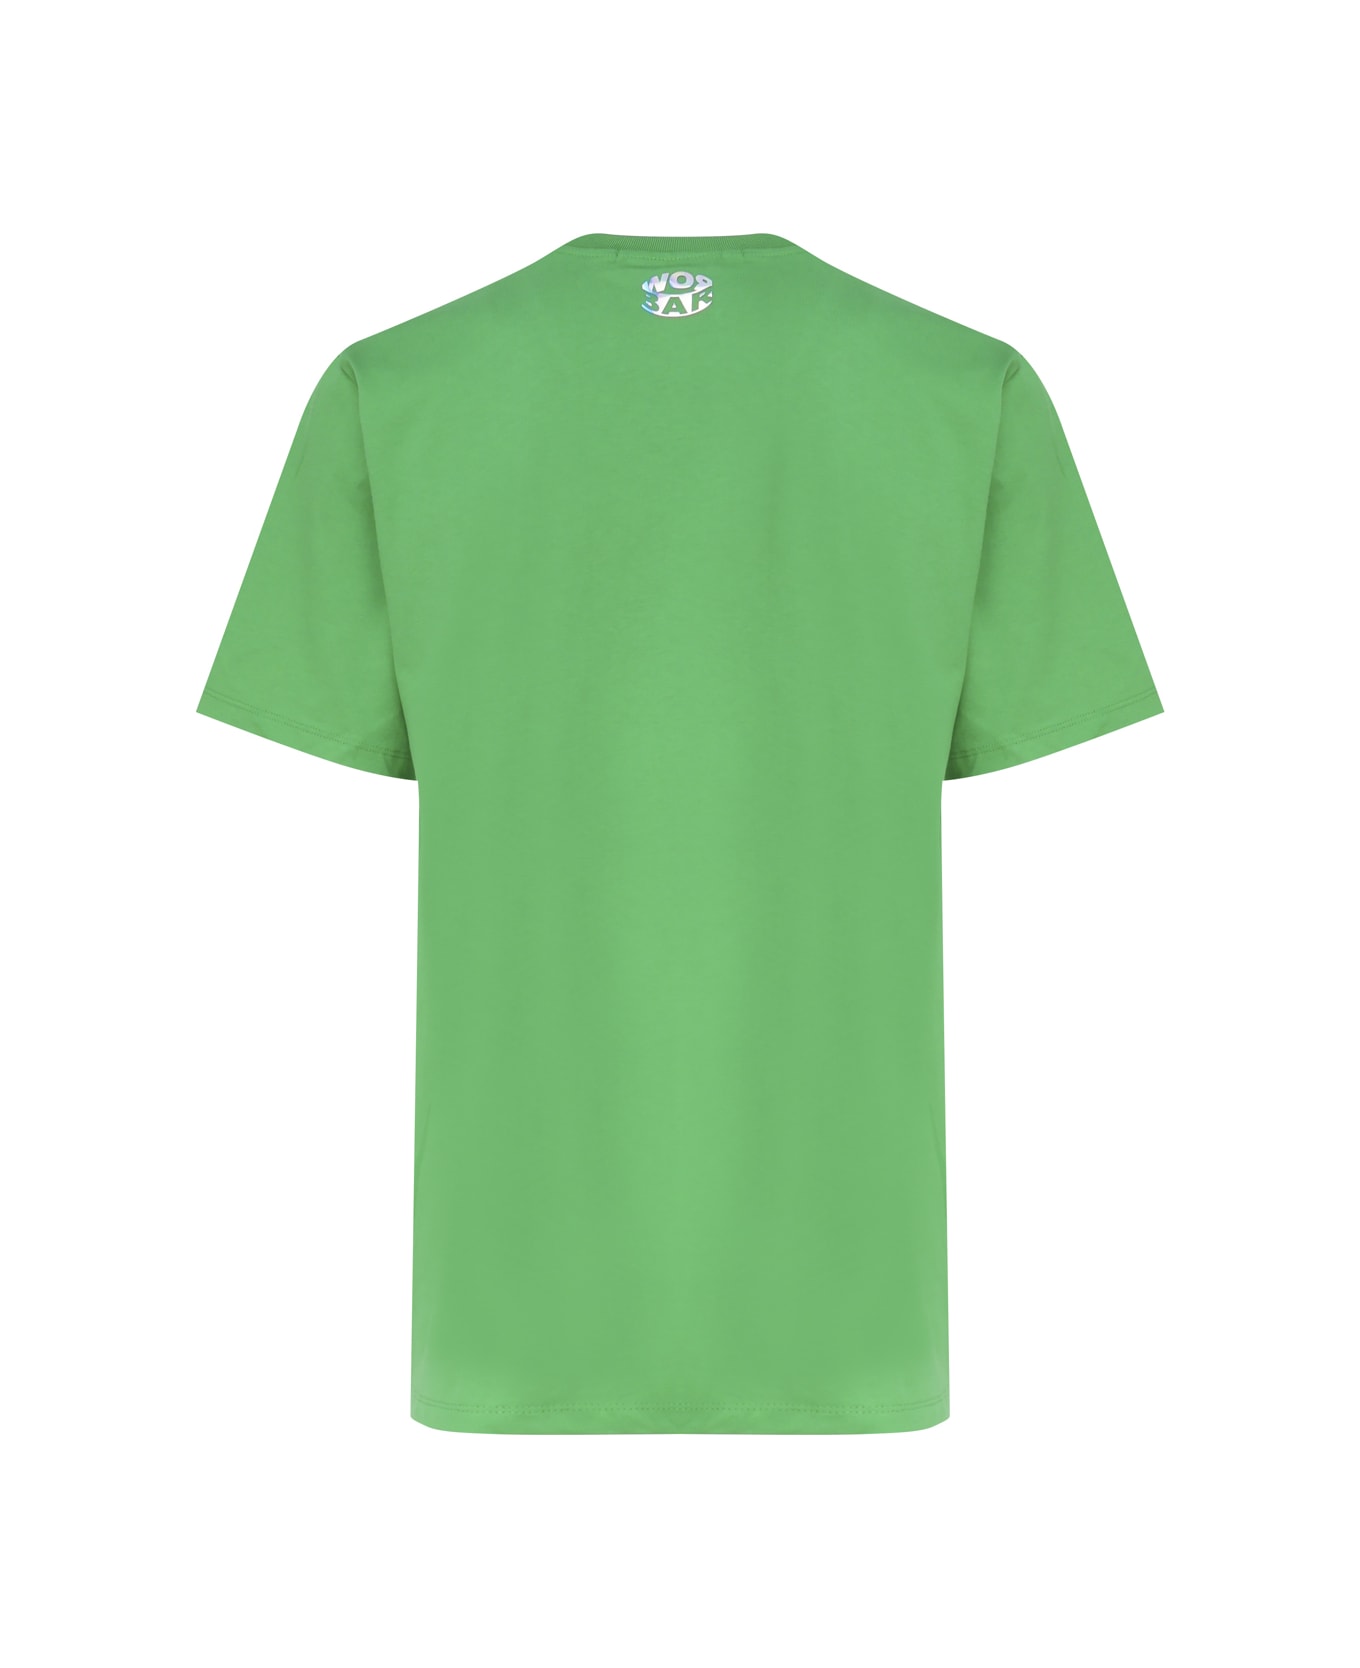 Barrow T-shirt With Smiley Logo - Green Tシャツ